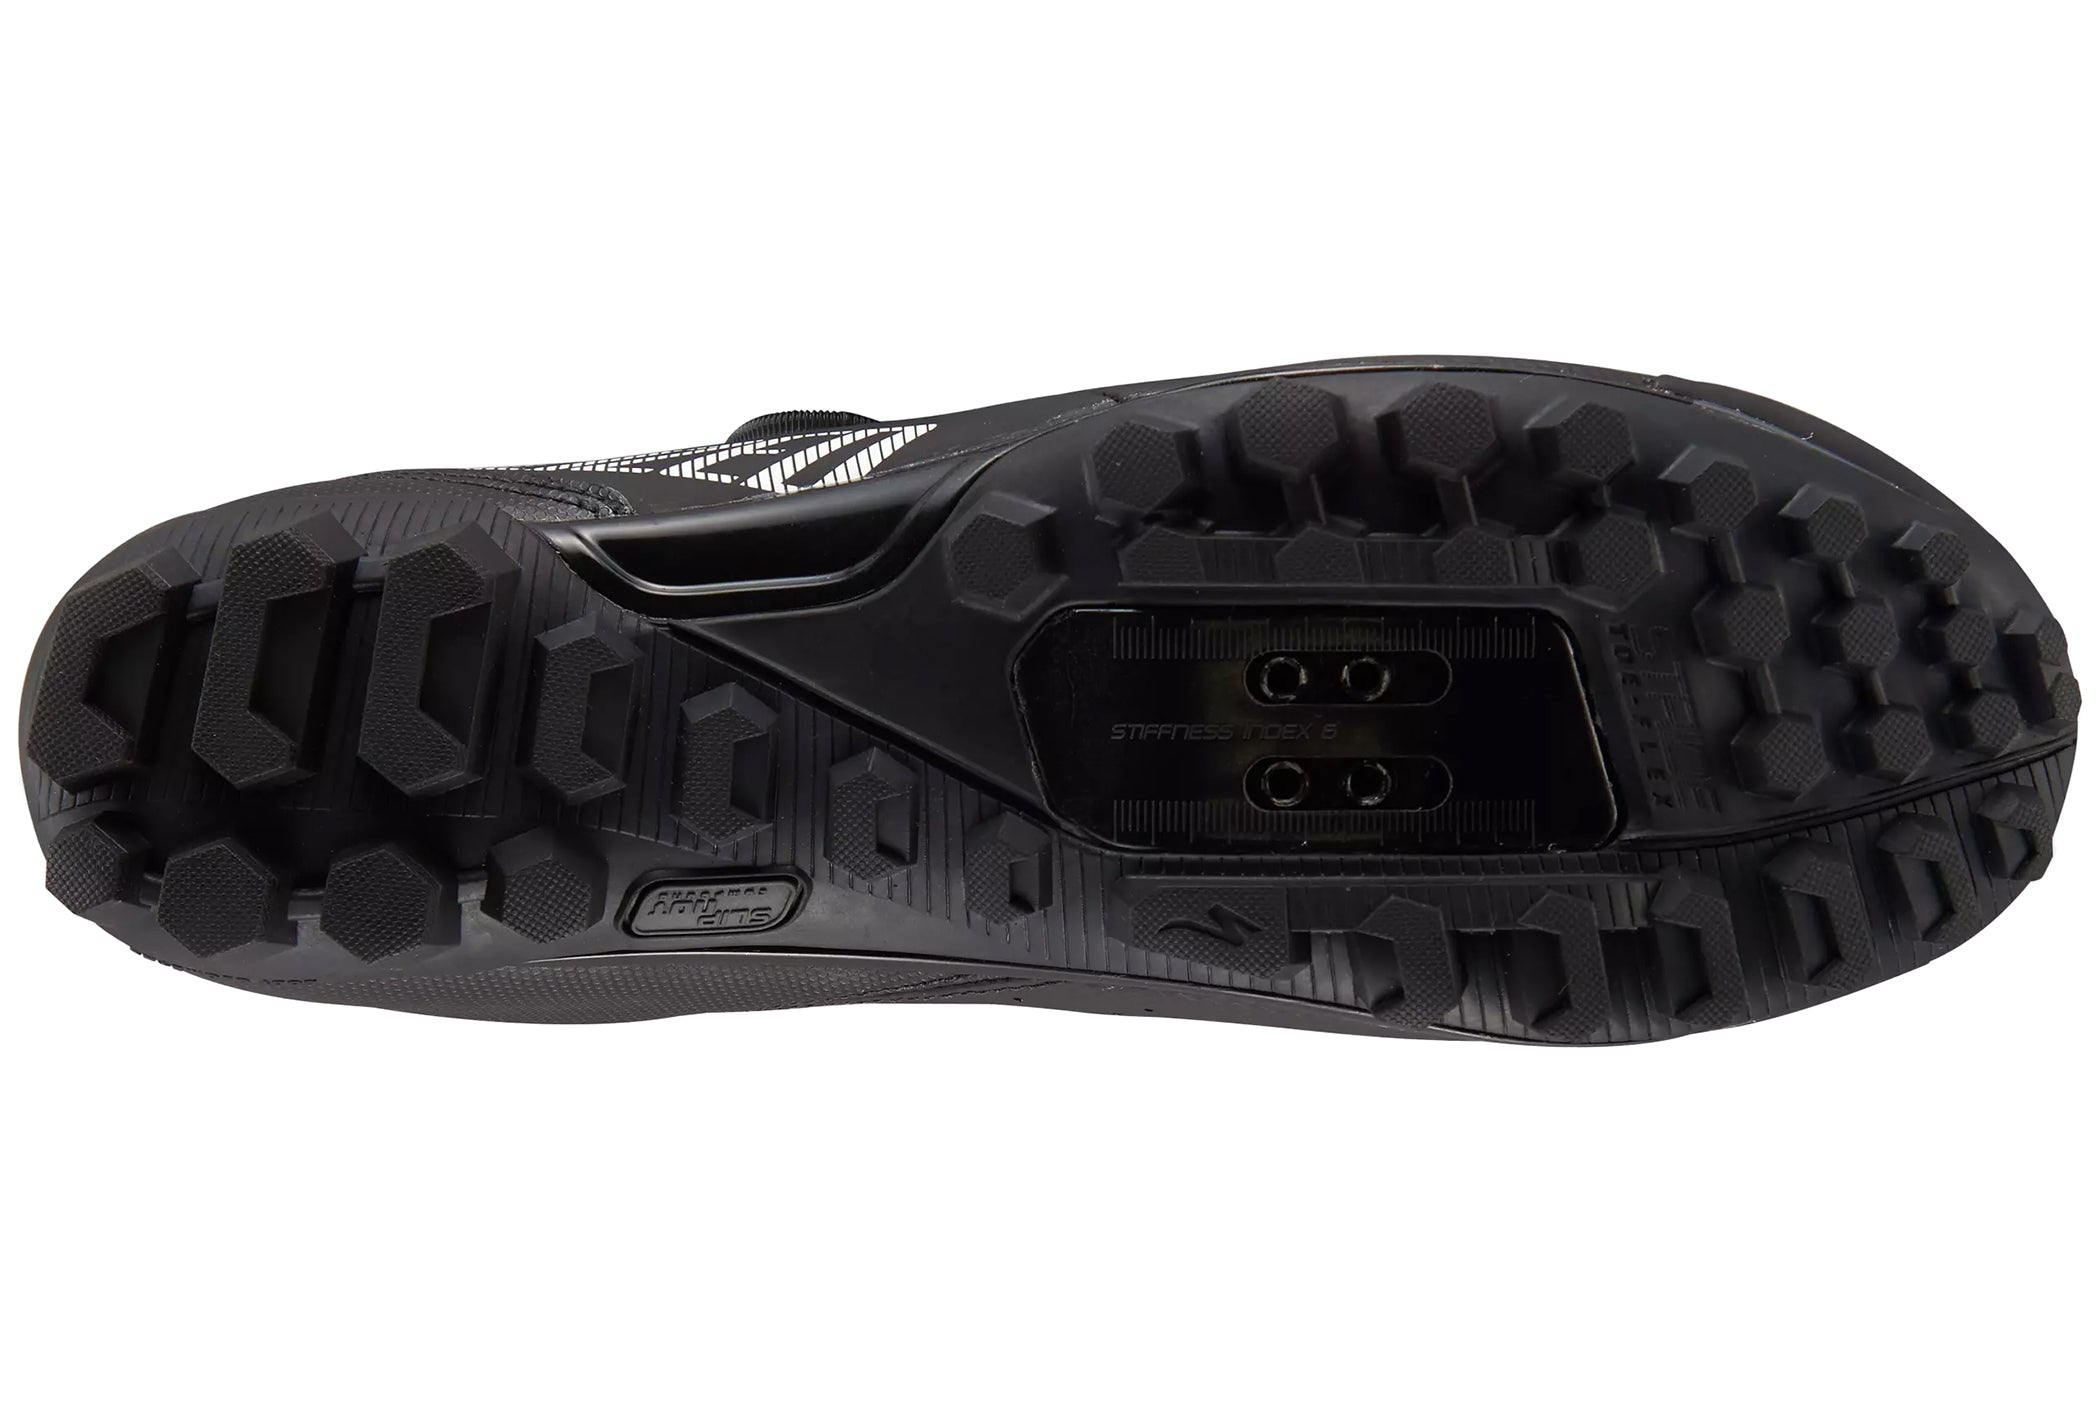 Specialized Recon 2.0 MTB Shoes | The Pro's Closet | AFW11782